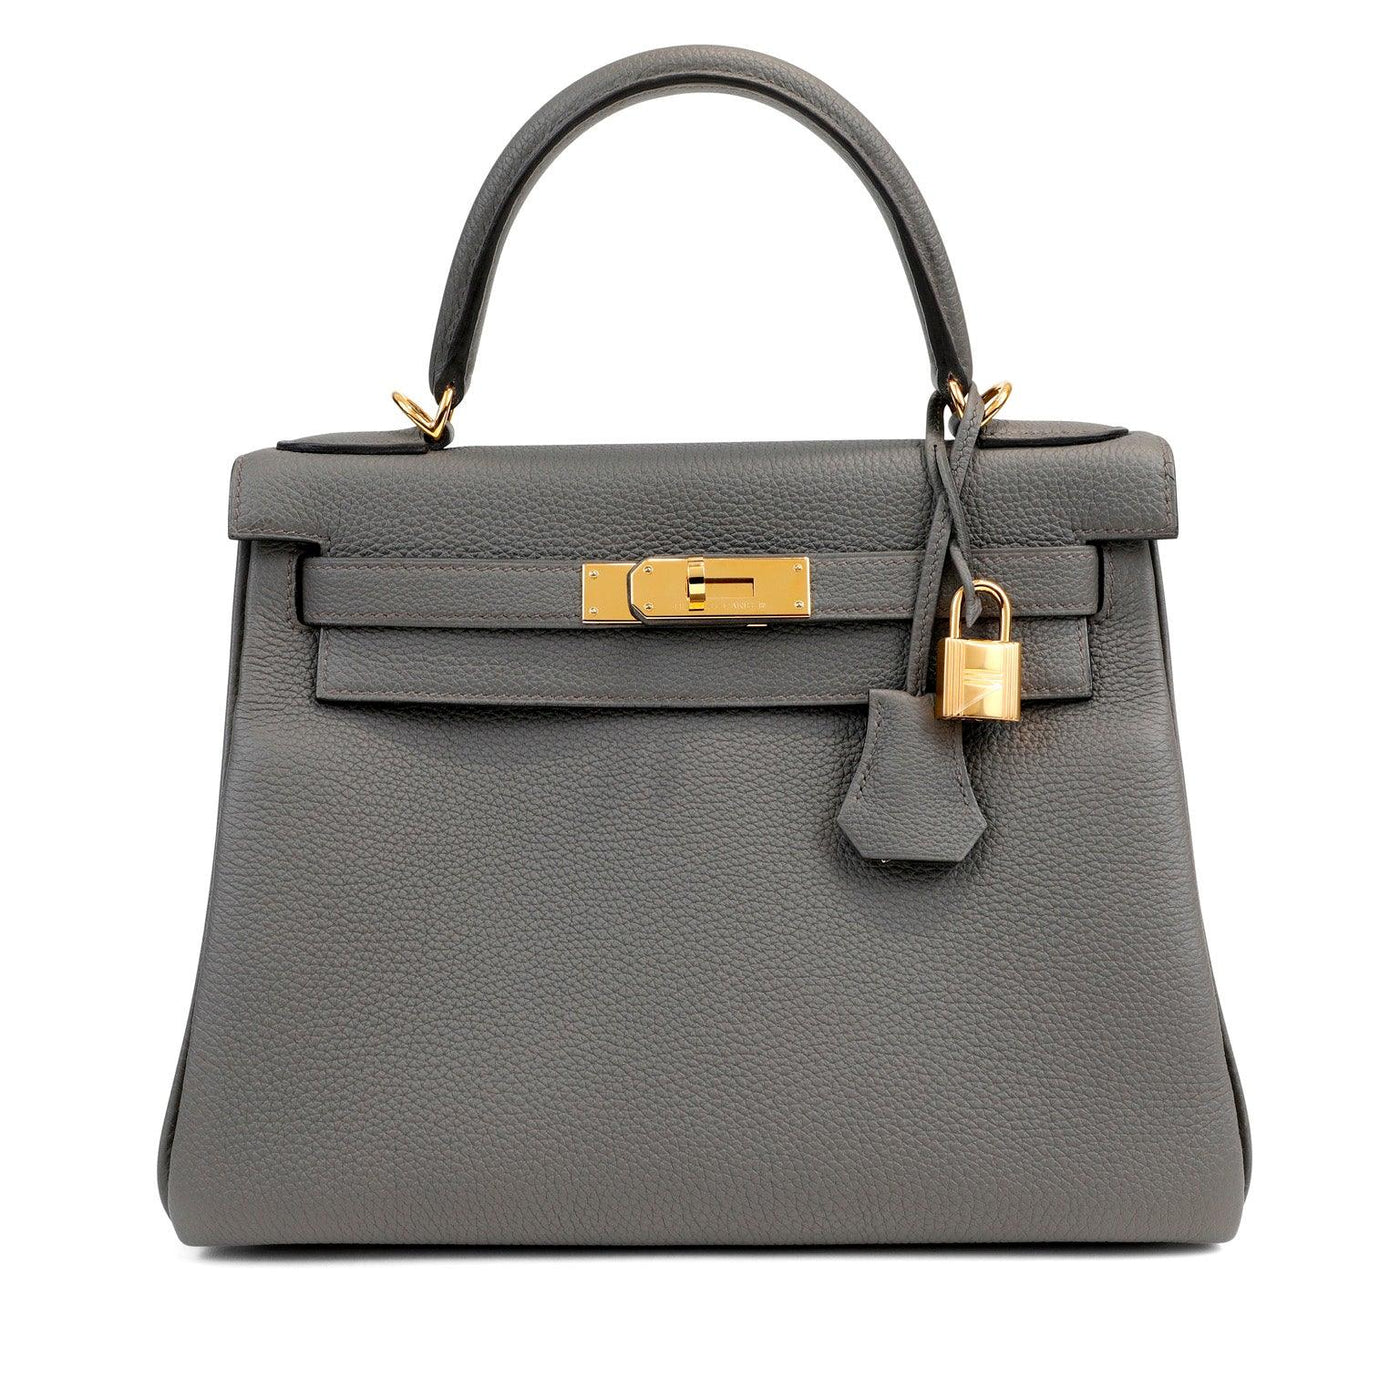 Hermès 28cm Gris Asphalte Togo Leather Kelly with Gold Hardware - Only Authentics